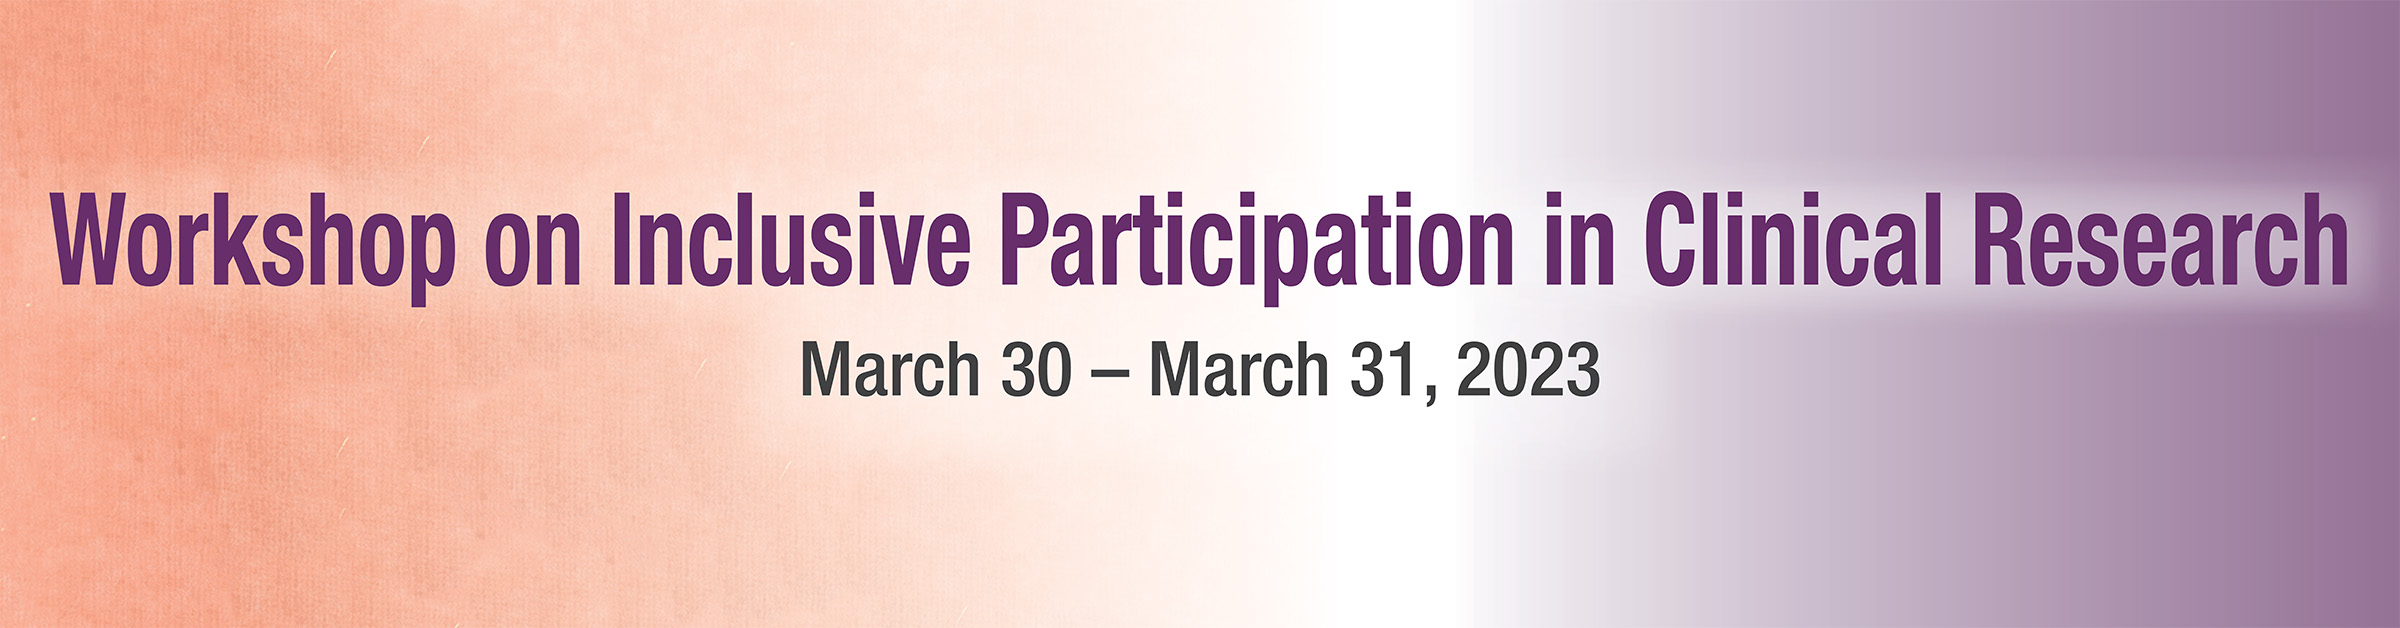 Workshop on Inclusive Participation in Clinical Research. March 30-March 31, 2023.